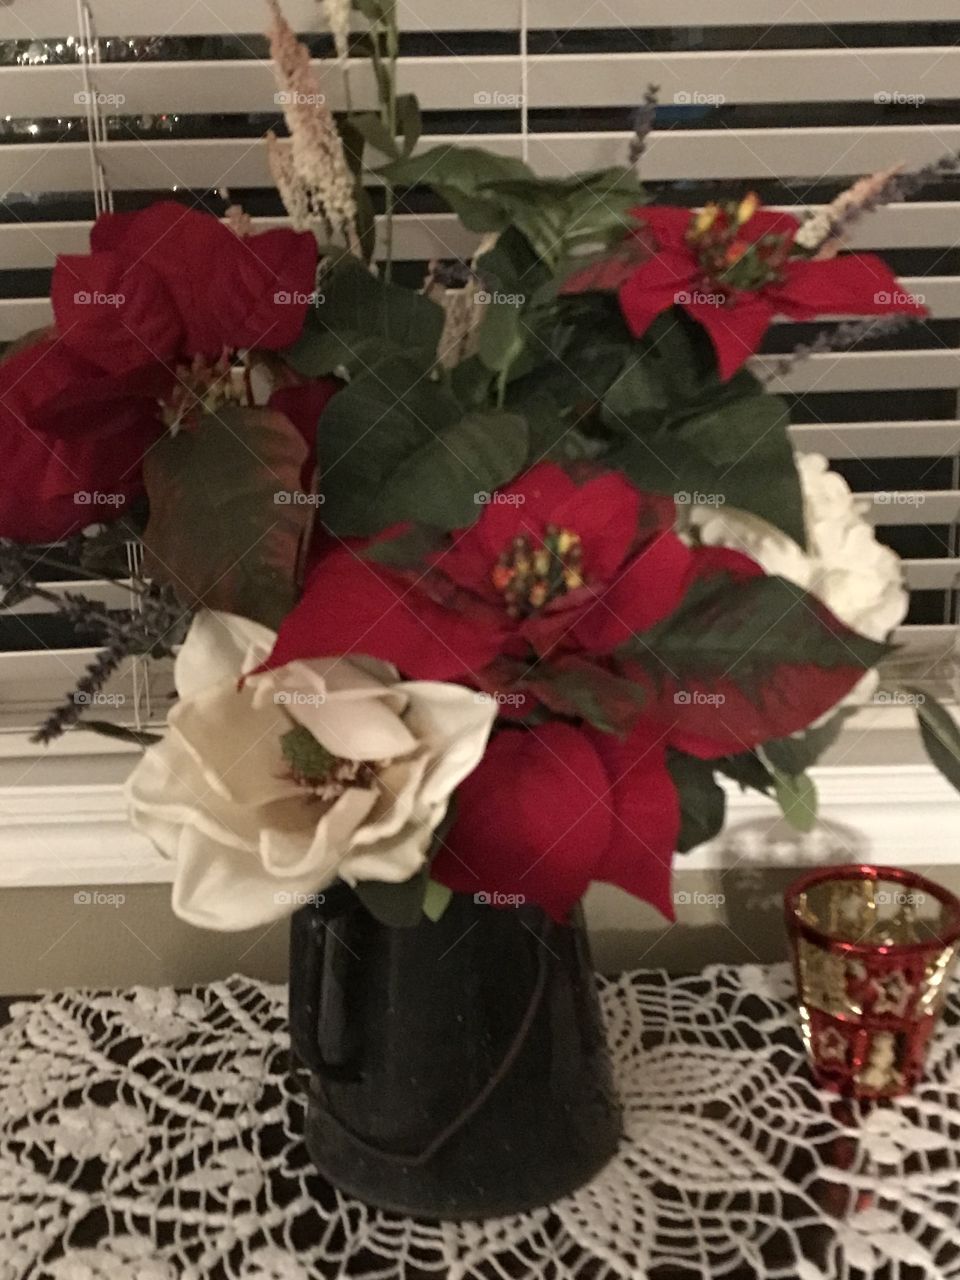 The joy of Christmas! A beautiful red and white flower arrangement to add some color to the room.